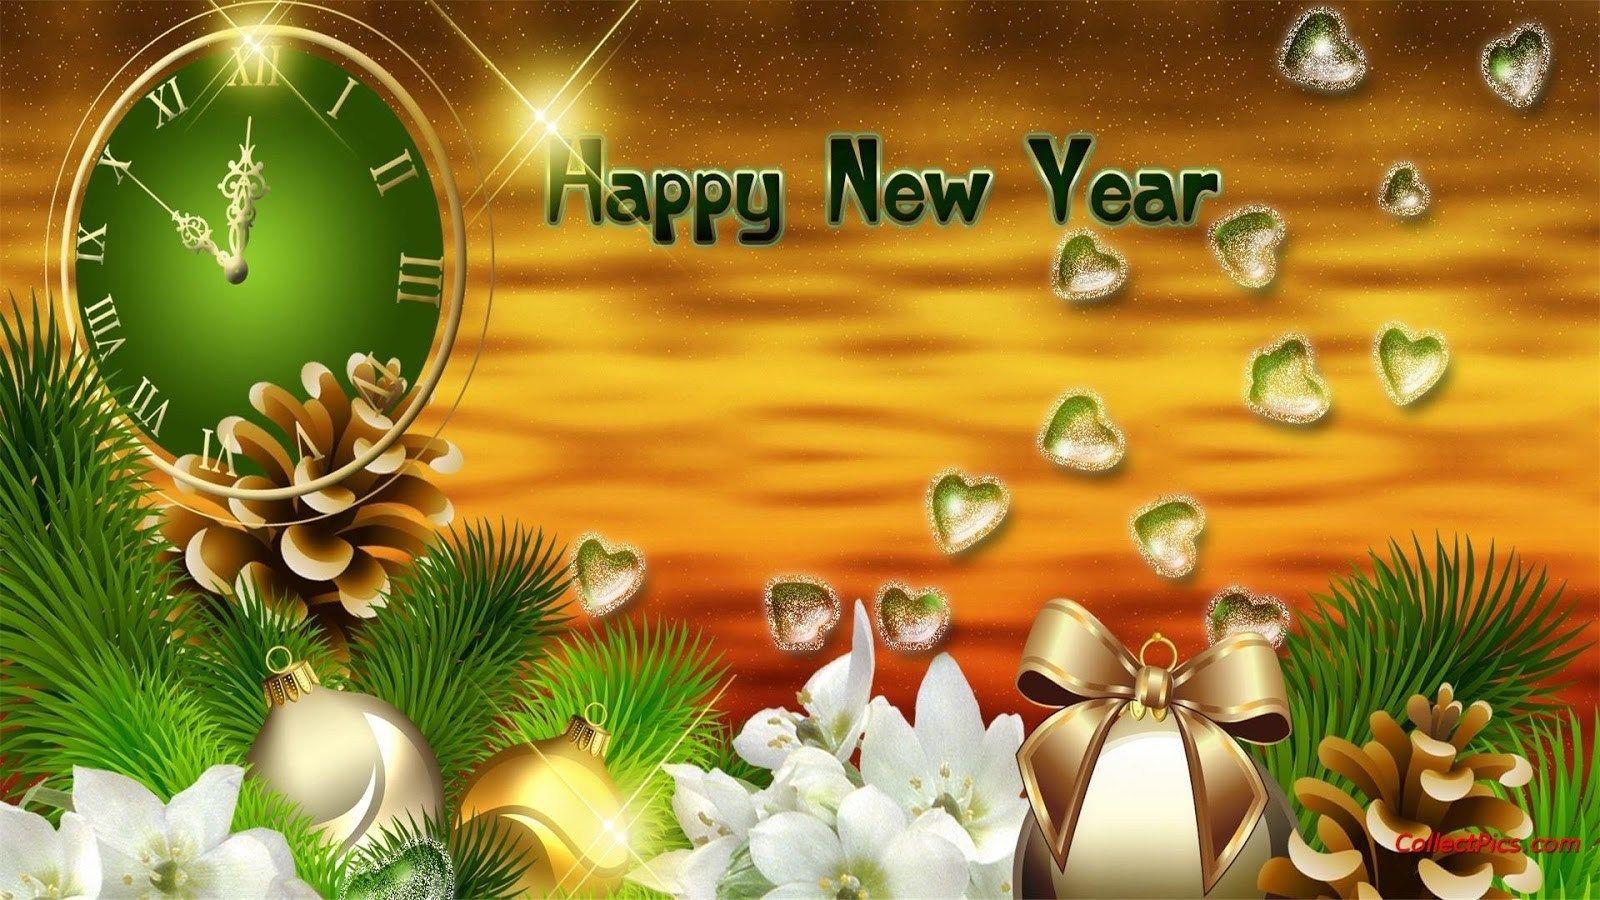 Download 20 Happy New Year 2016 Mobile Wallpaper [ Free ]